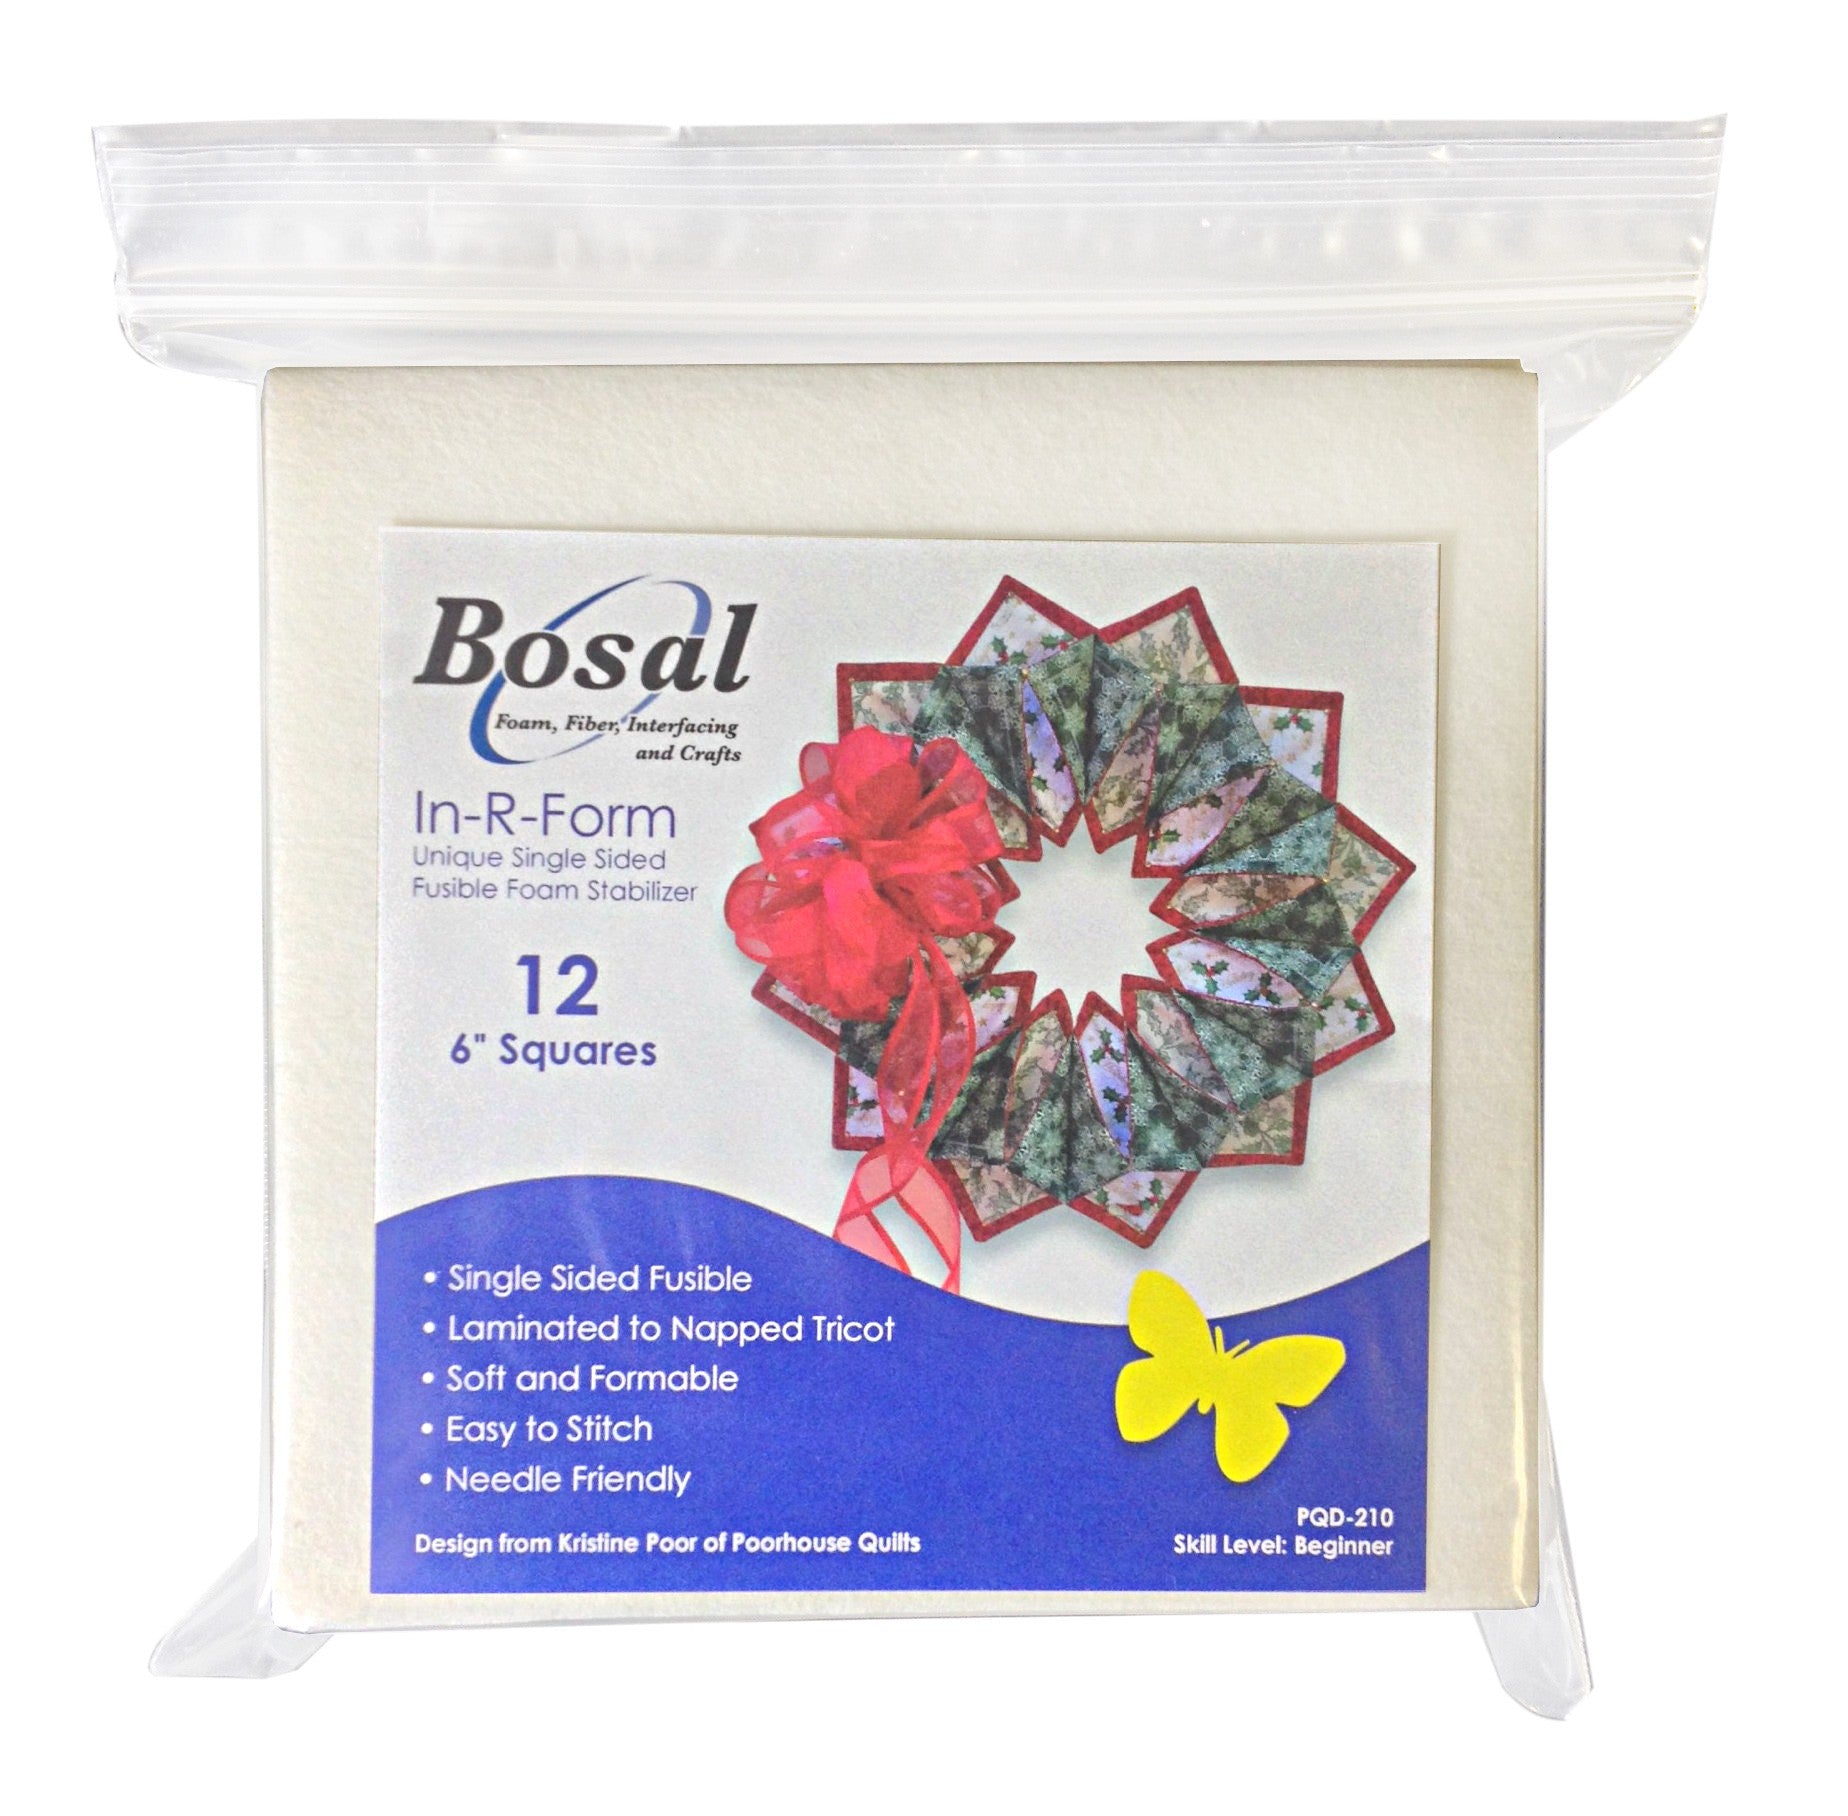 Bosal In-R-Form Single-Sided Fusible Stabilizer Shapes 12 - 6in